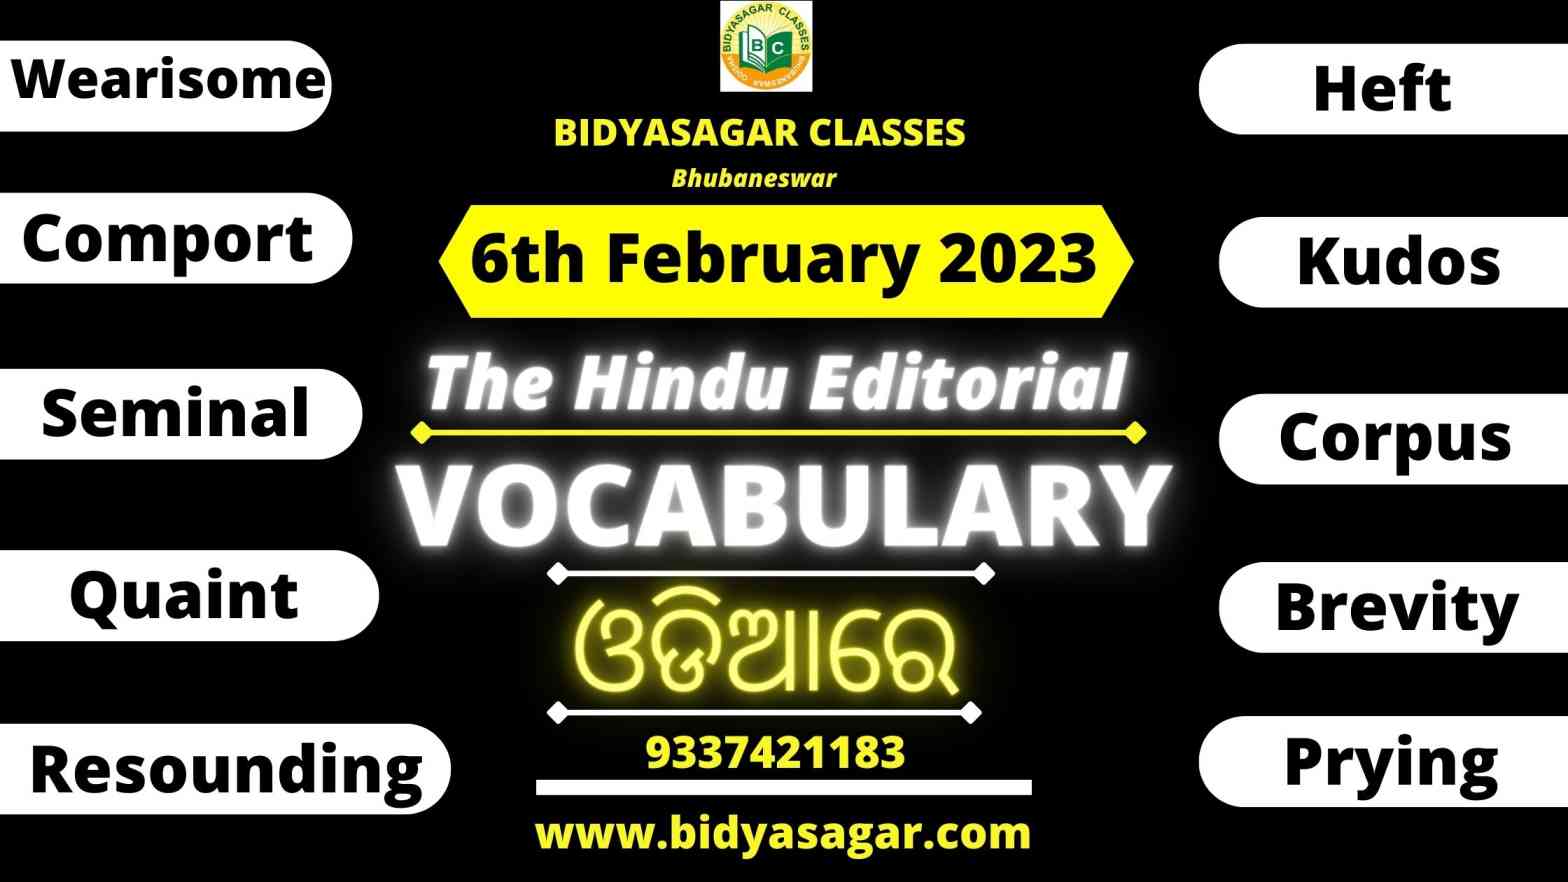 The Hindu Editorial Vocabulary of 6th February 2023